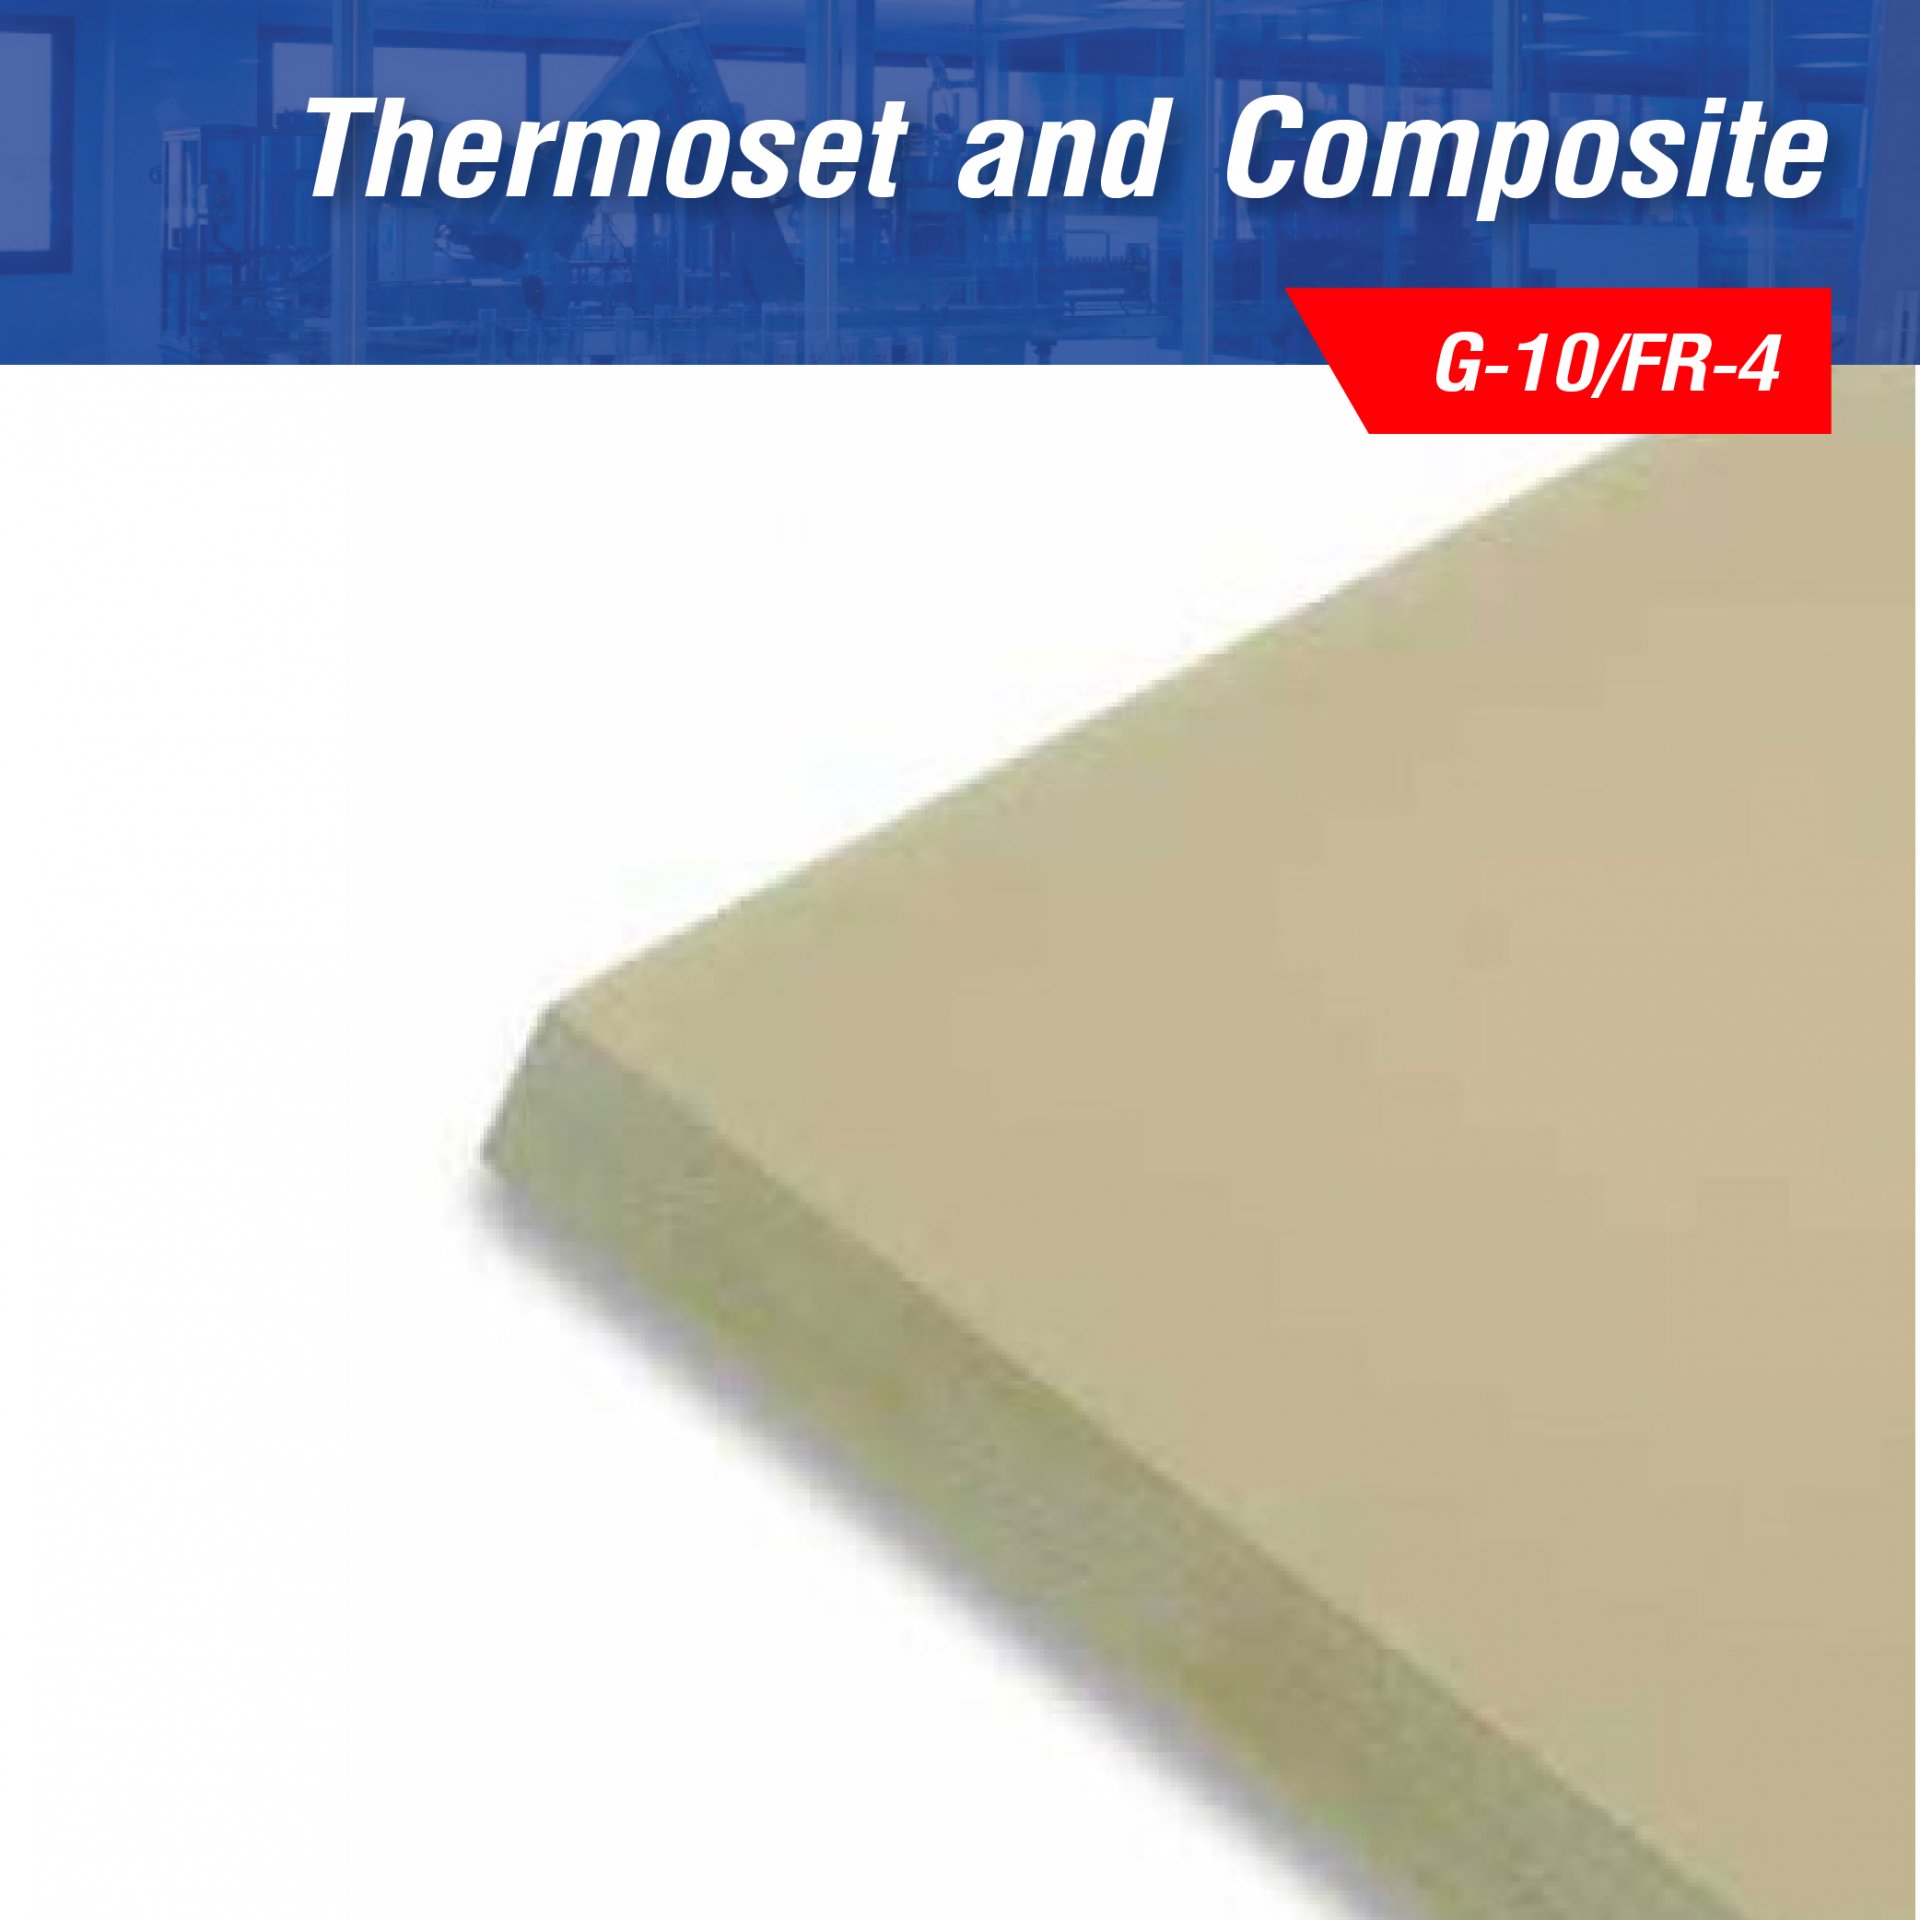 Thermoset and Composite